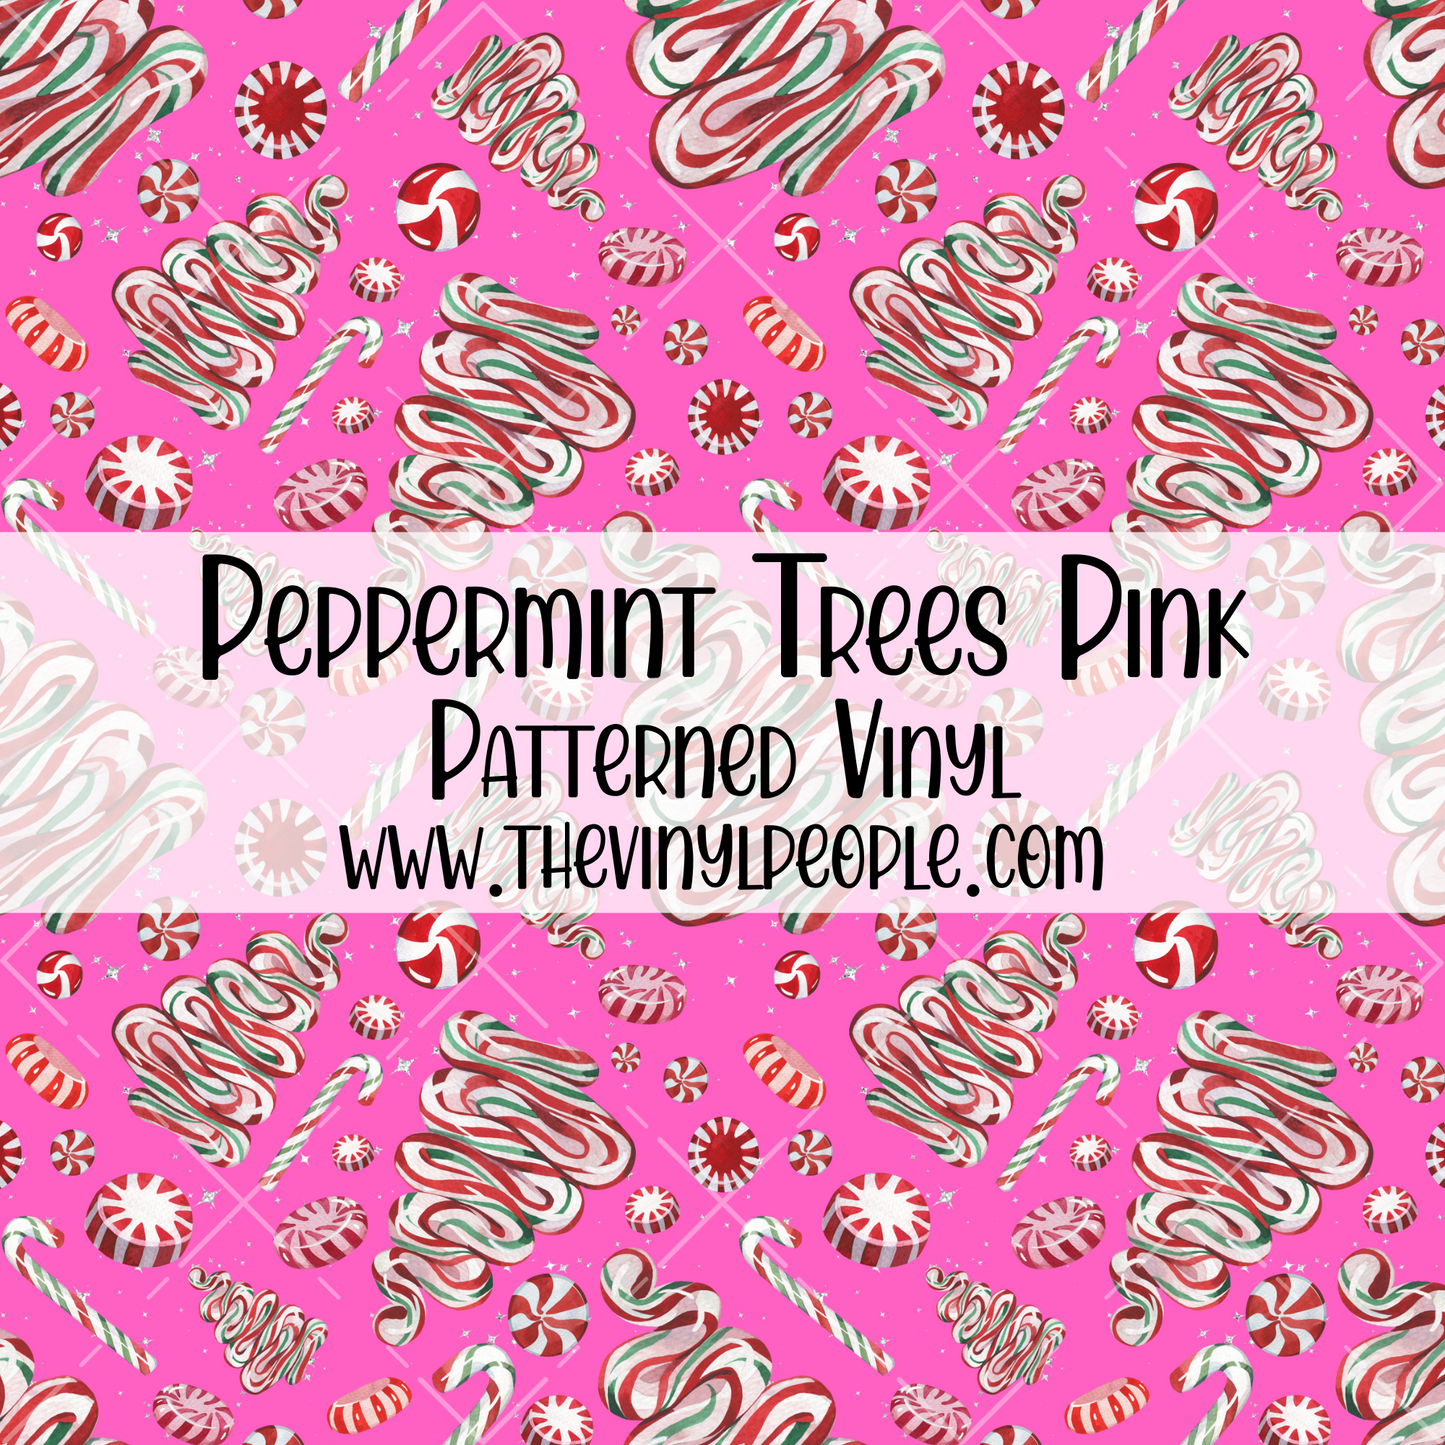 Peppermint Trees Pink Patterned Vinyl